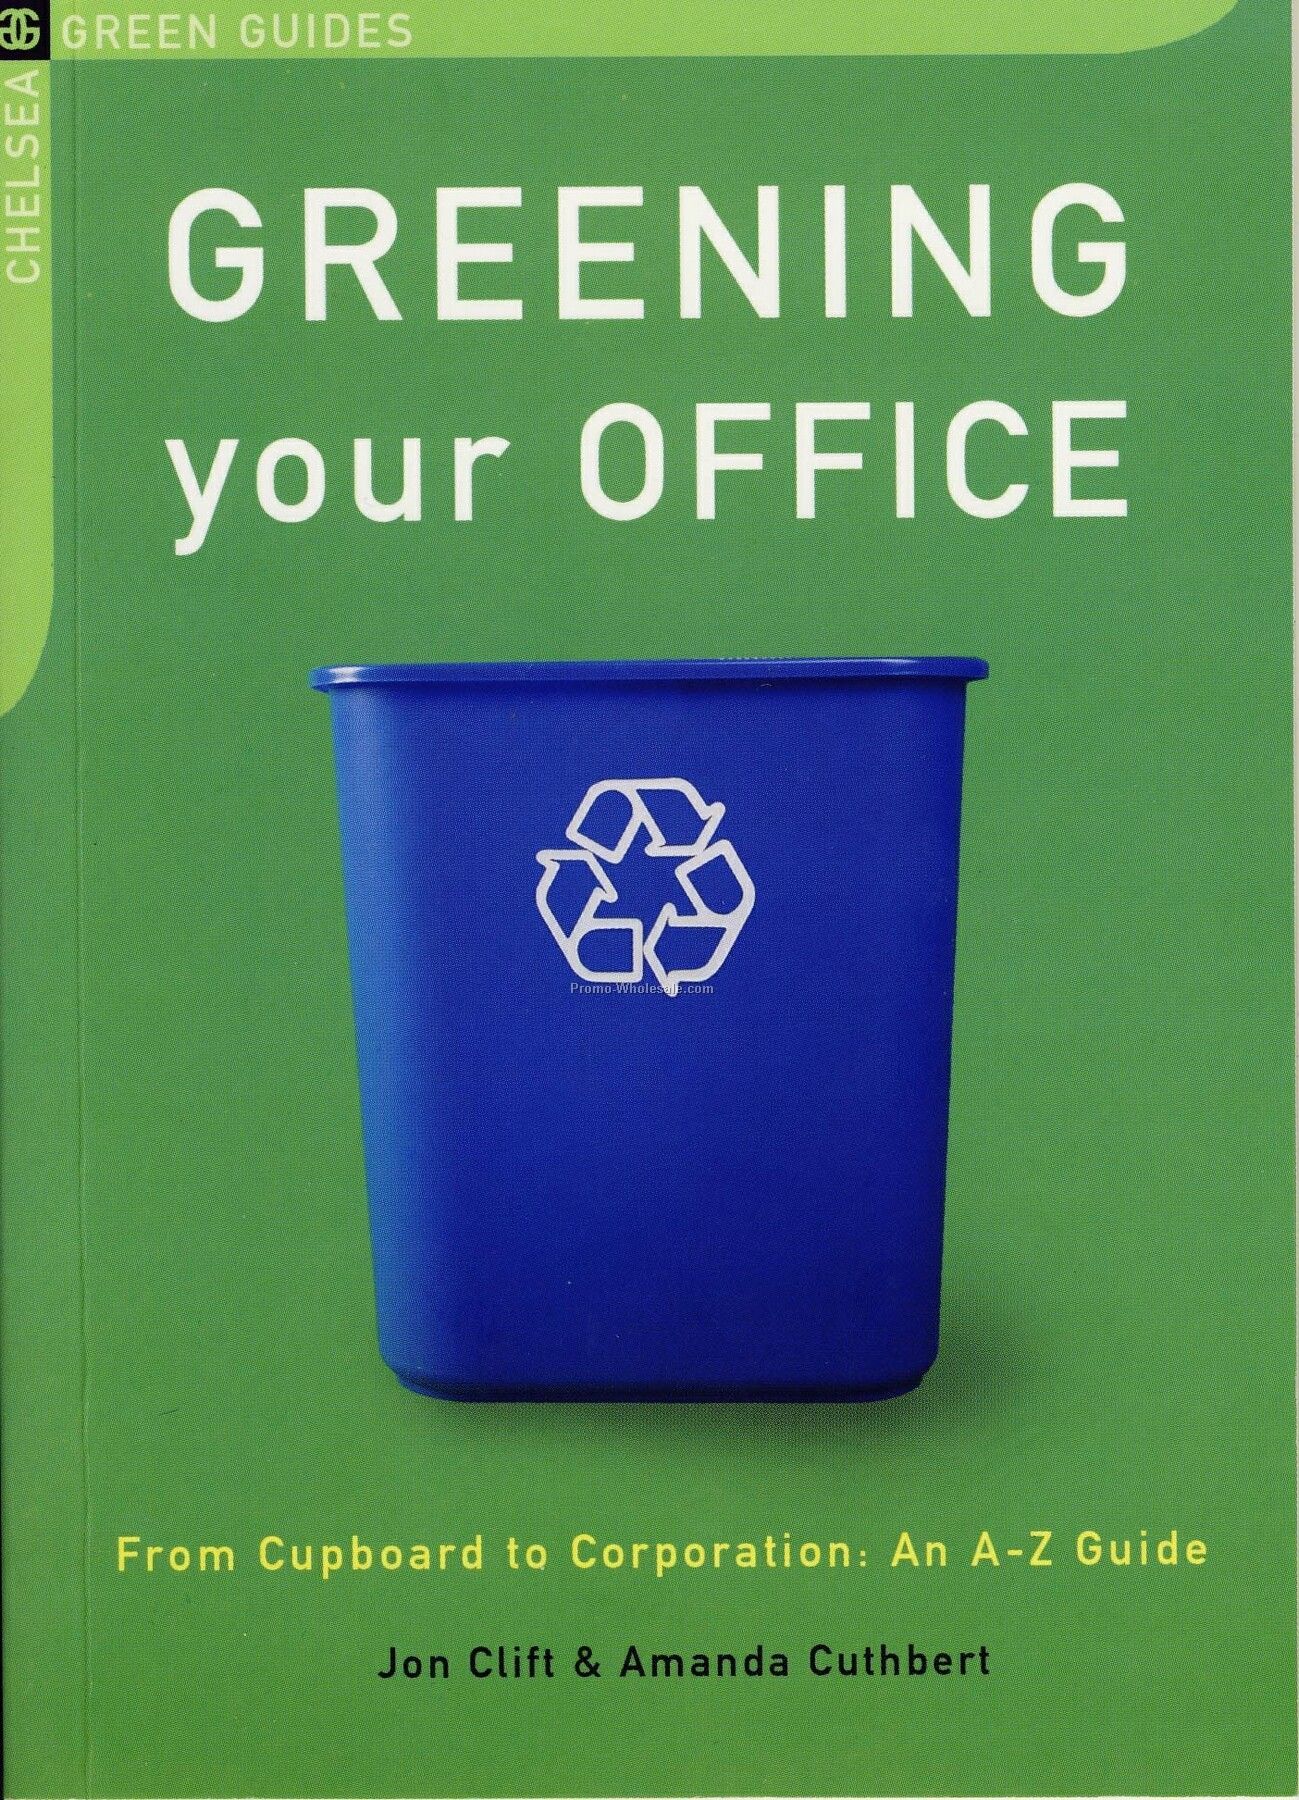 Greening Your Office - Little Green Guides